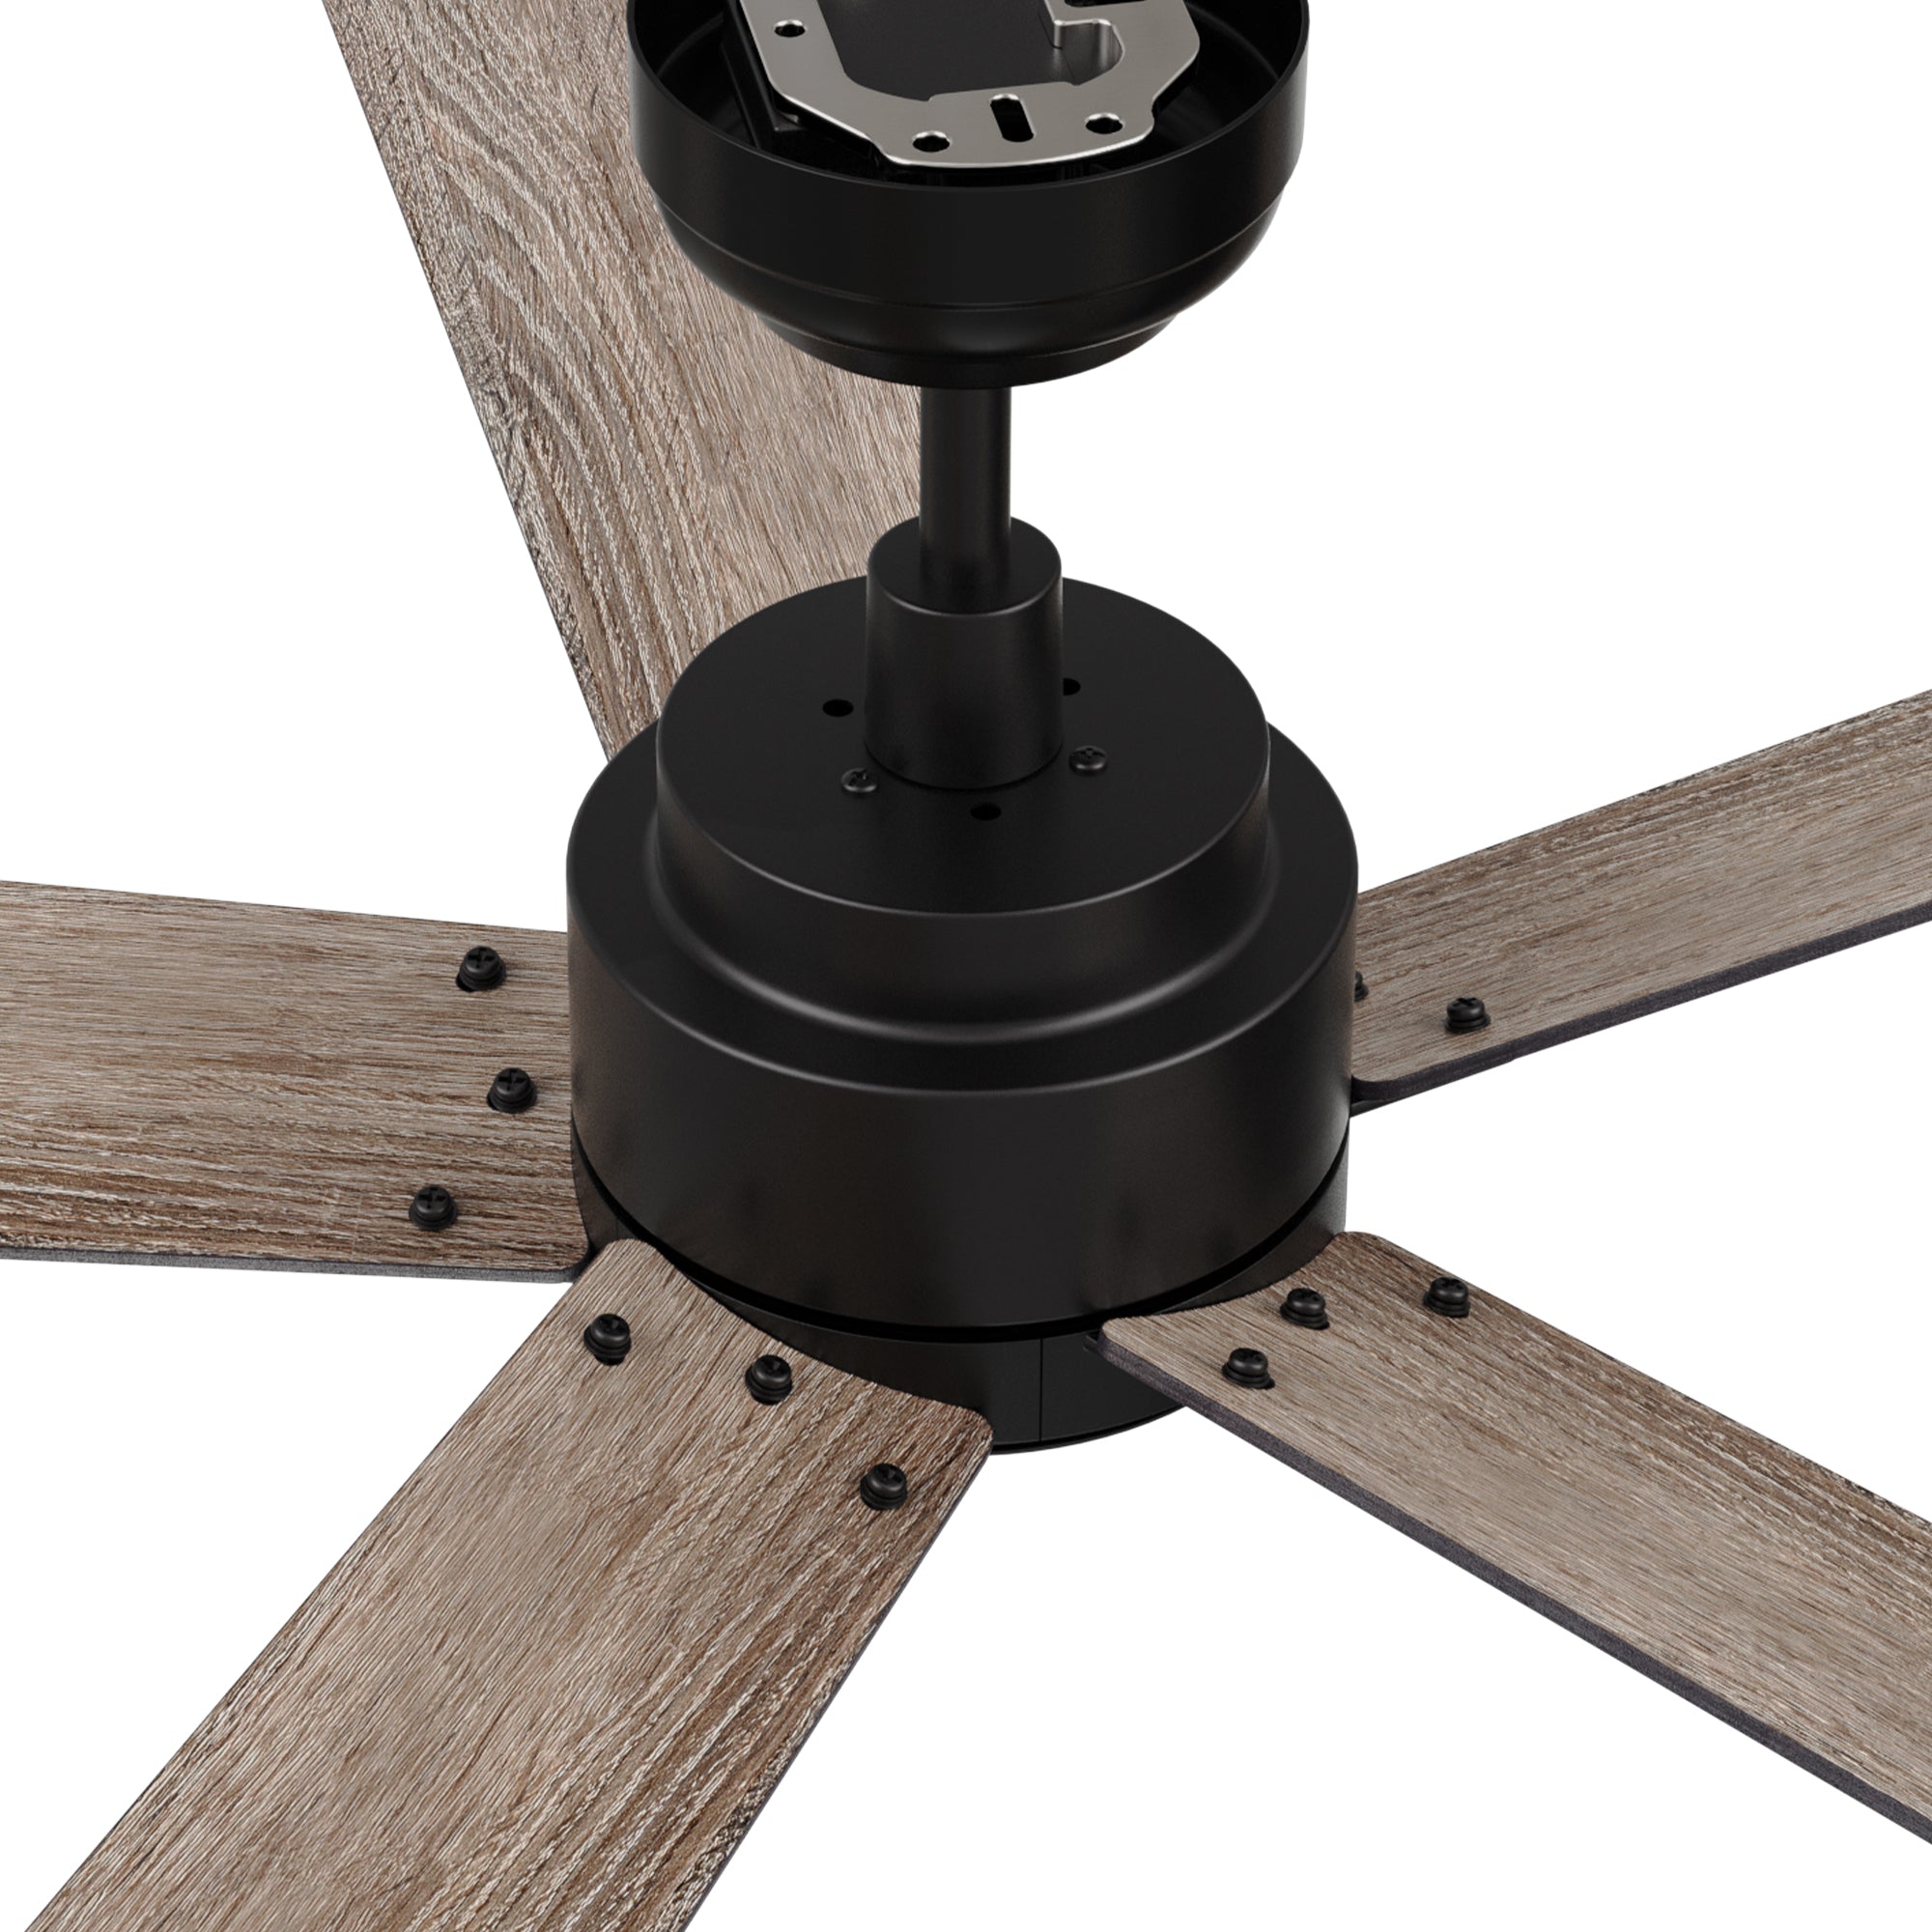 Carro Welland 60 inch remote control ceiling fans boasts a simple design with a Black finish and elegant Plywood blades, Fans are made with incredibly efficient and completely silent DC motors. 